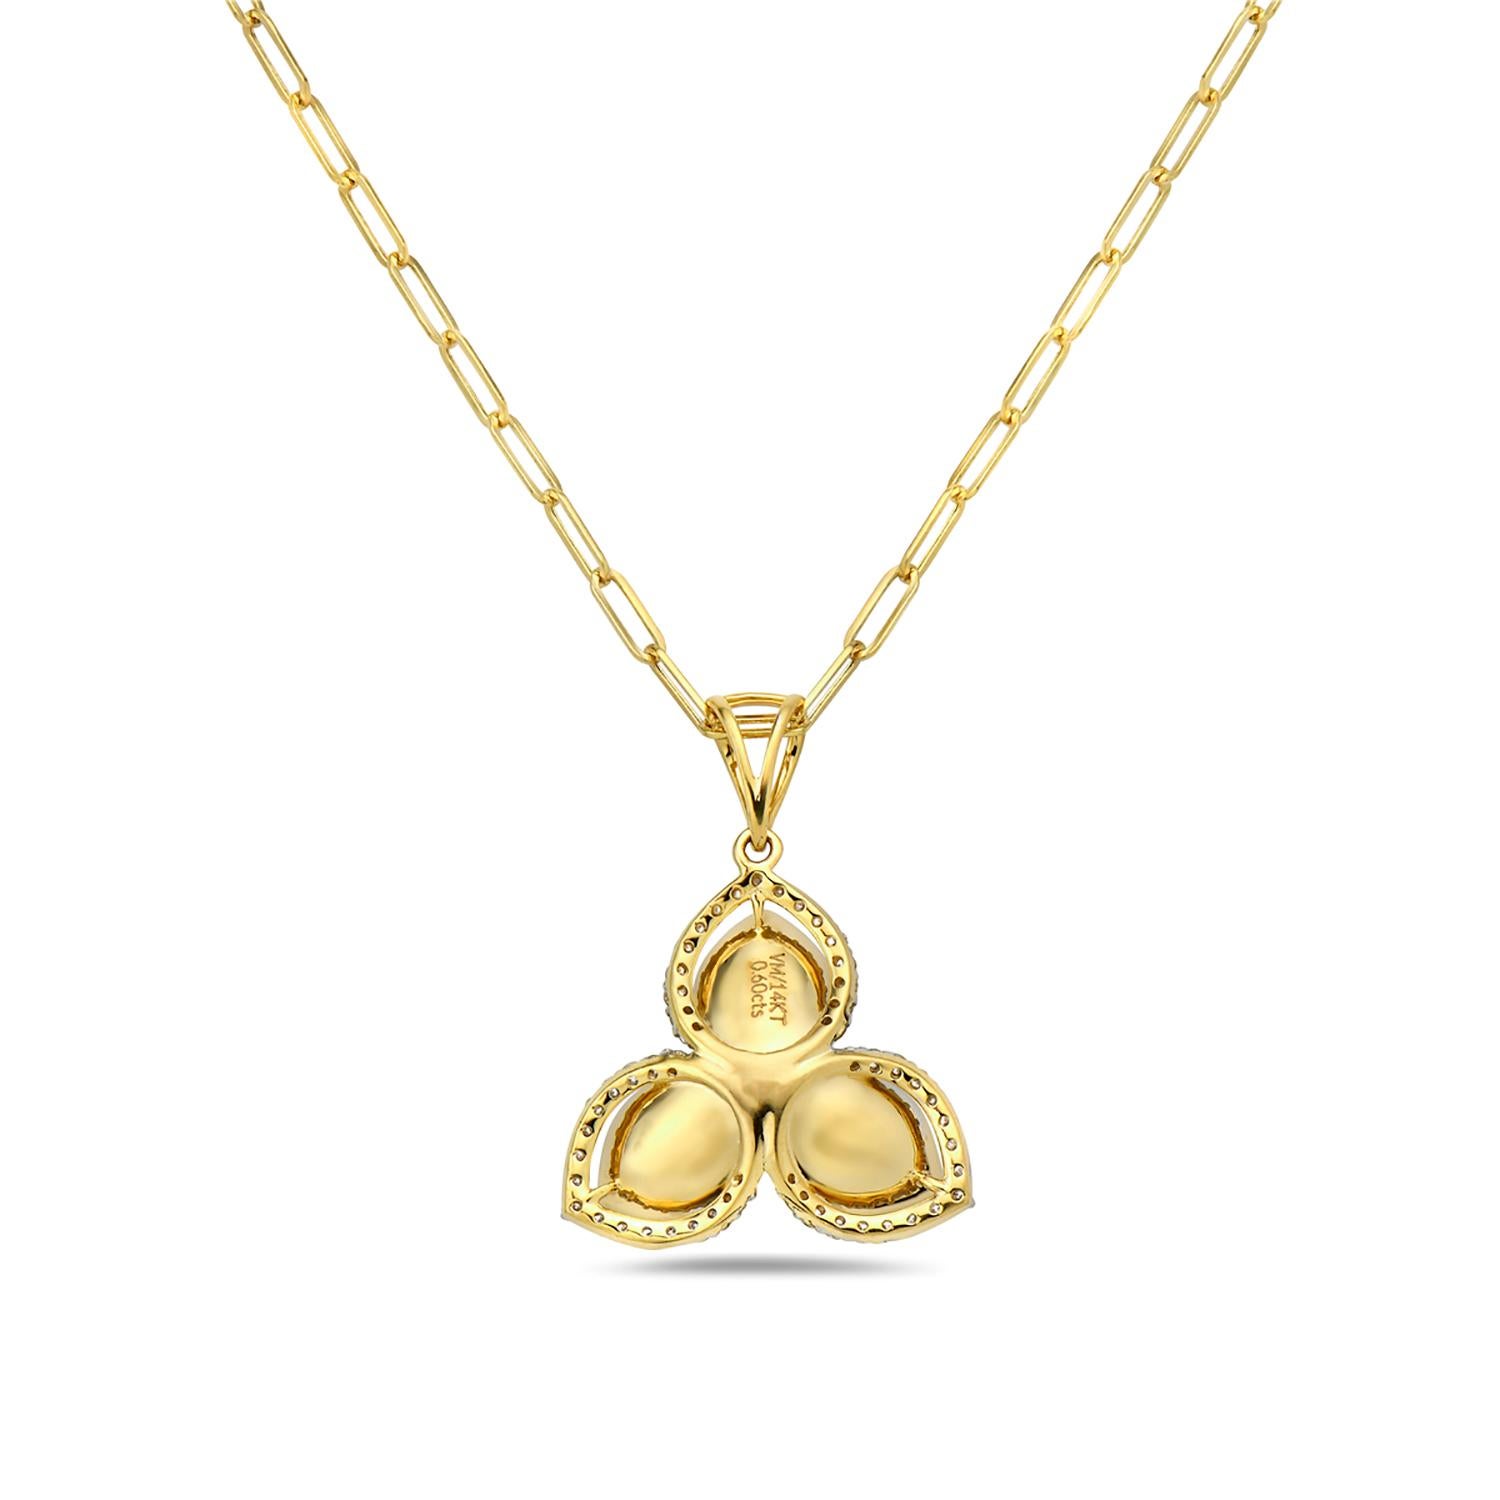 Mixed Cut Flower Shaped Pendant with Carved Petals Equipped with Halo Diamonds in 14k Gold For Sale